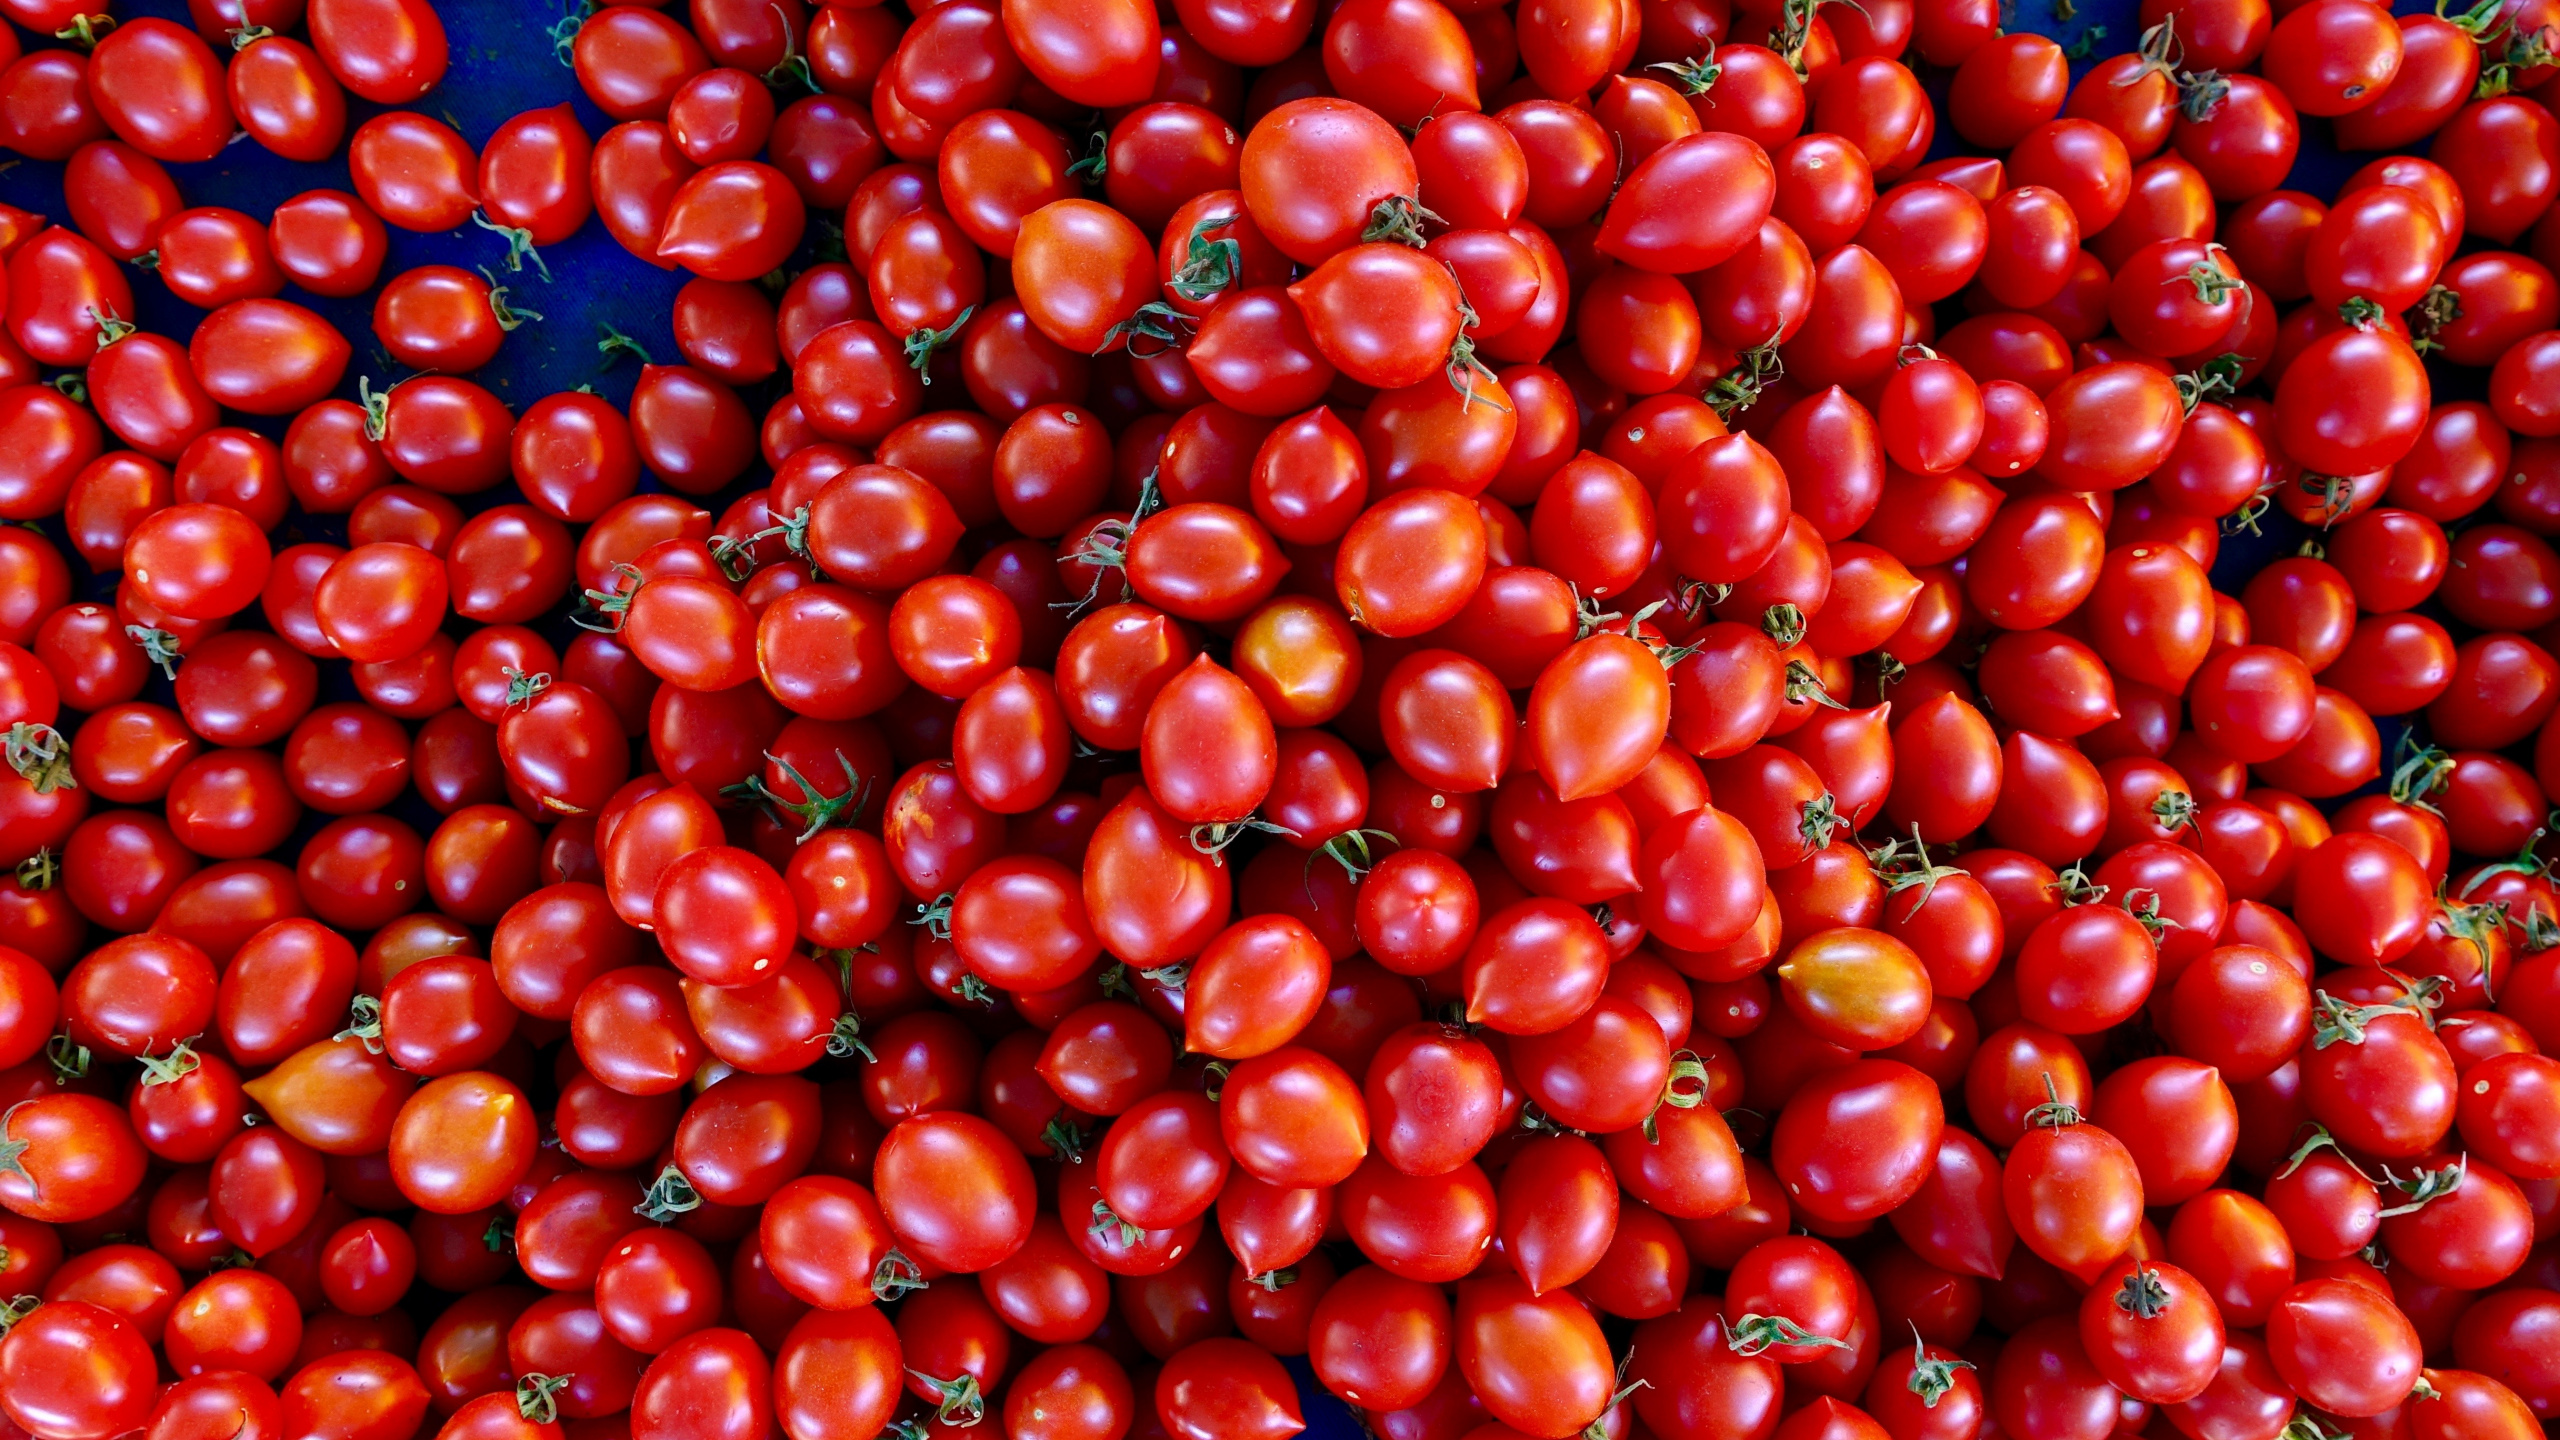 Red Round Fruits on Blue Plastic Container. Wallpaper in 2560x1440 Resolution